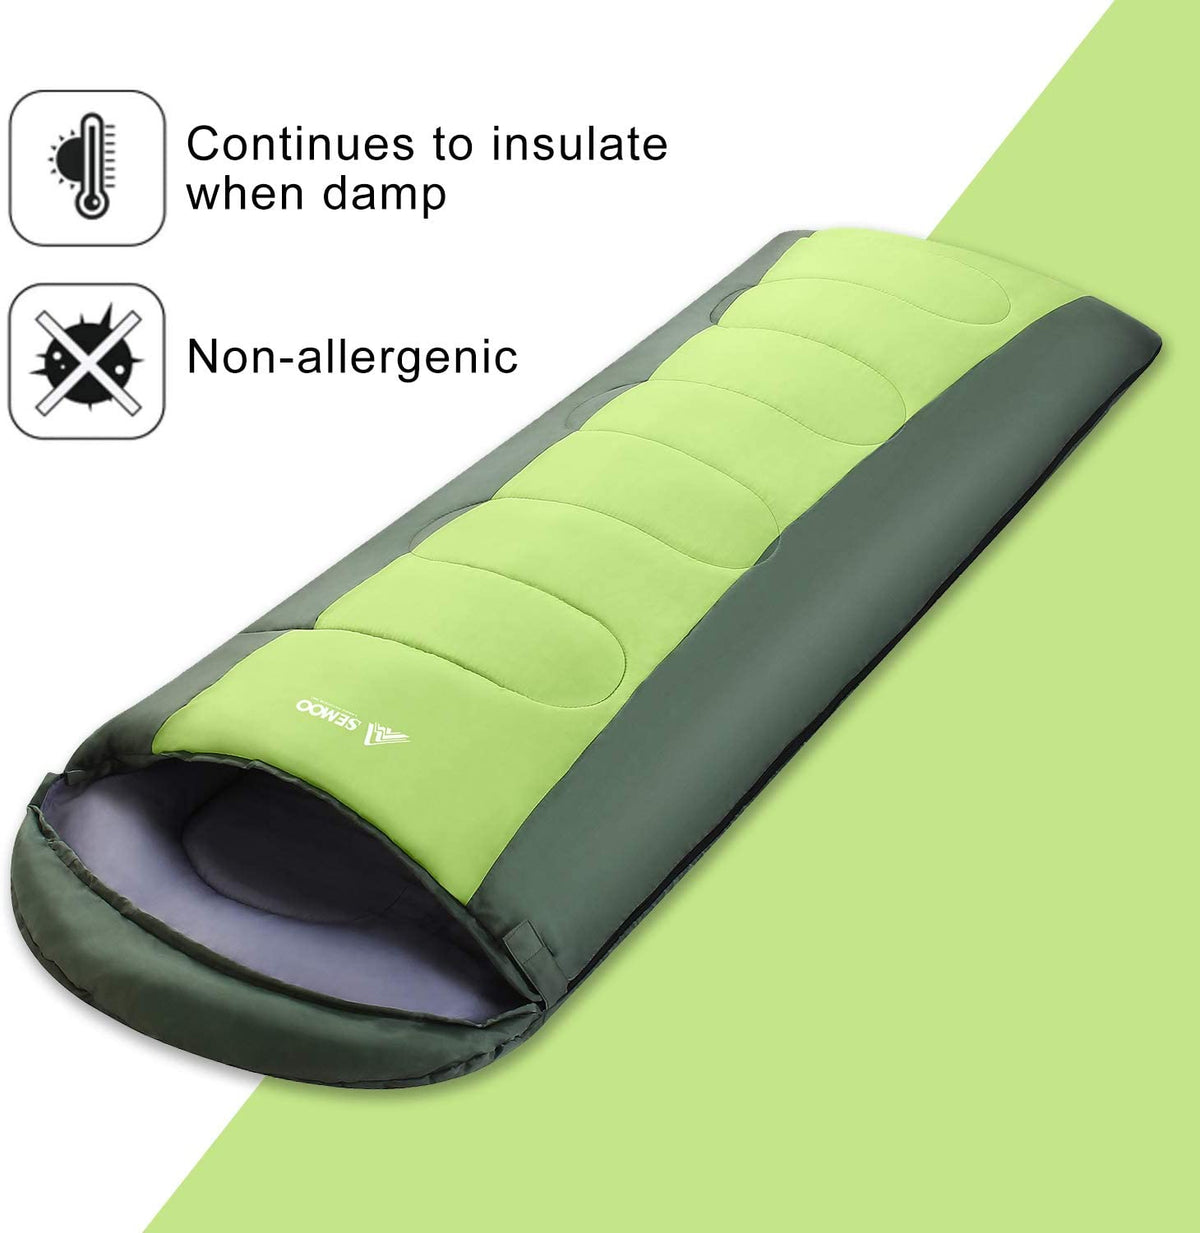 SEMOO Sleeping Bag Portable Shell Compression Sack for Backpacking Camping Traveling